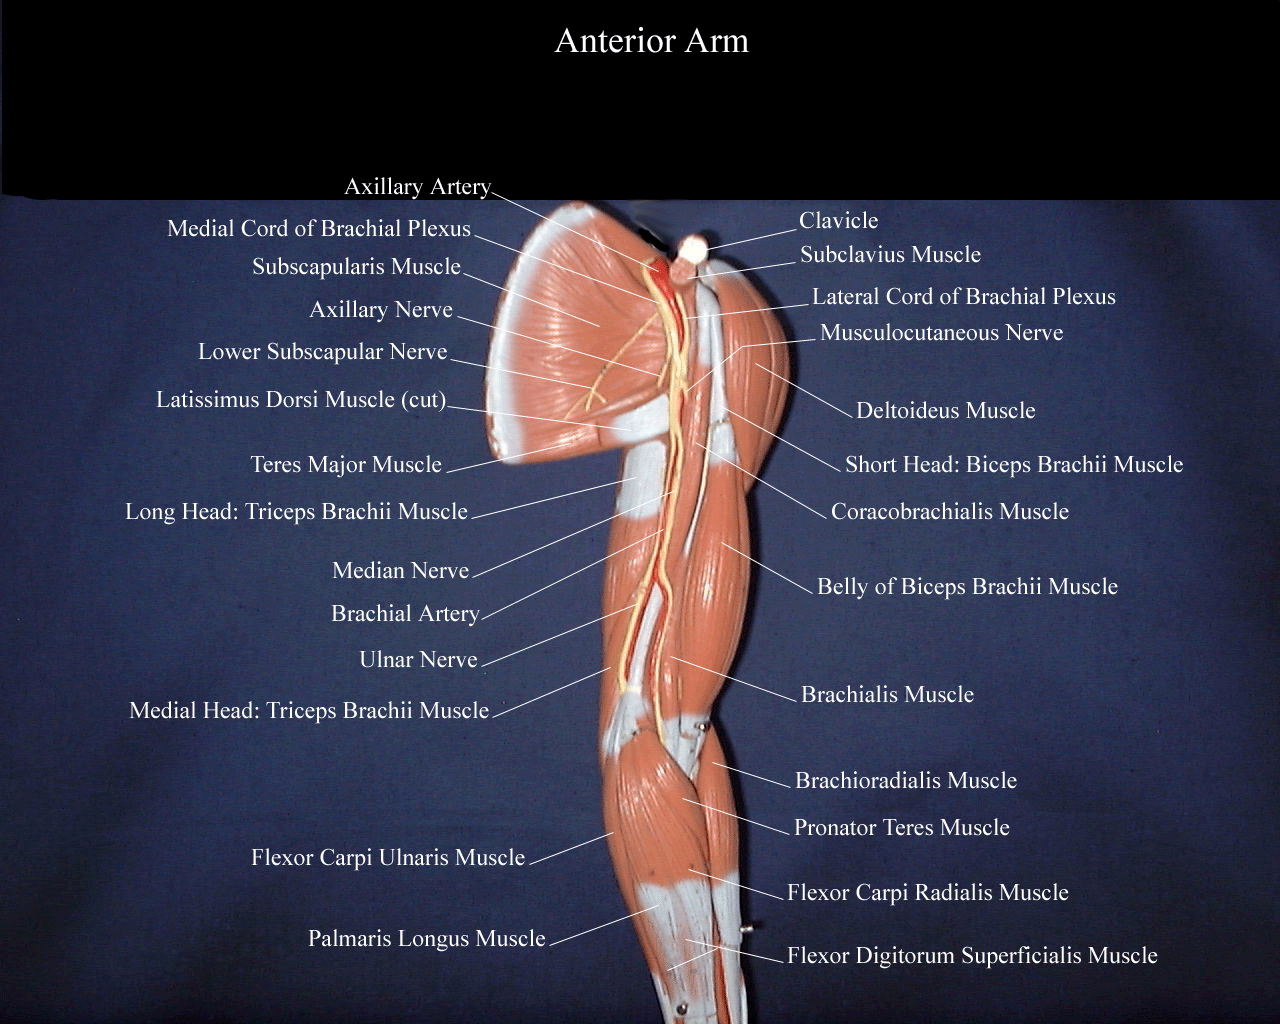 a picture of a model of the anterior arm